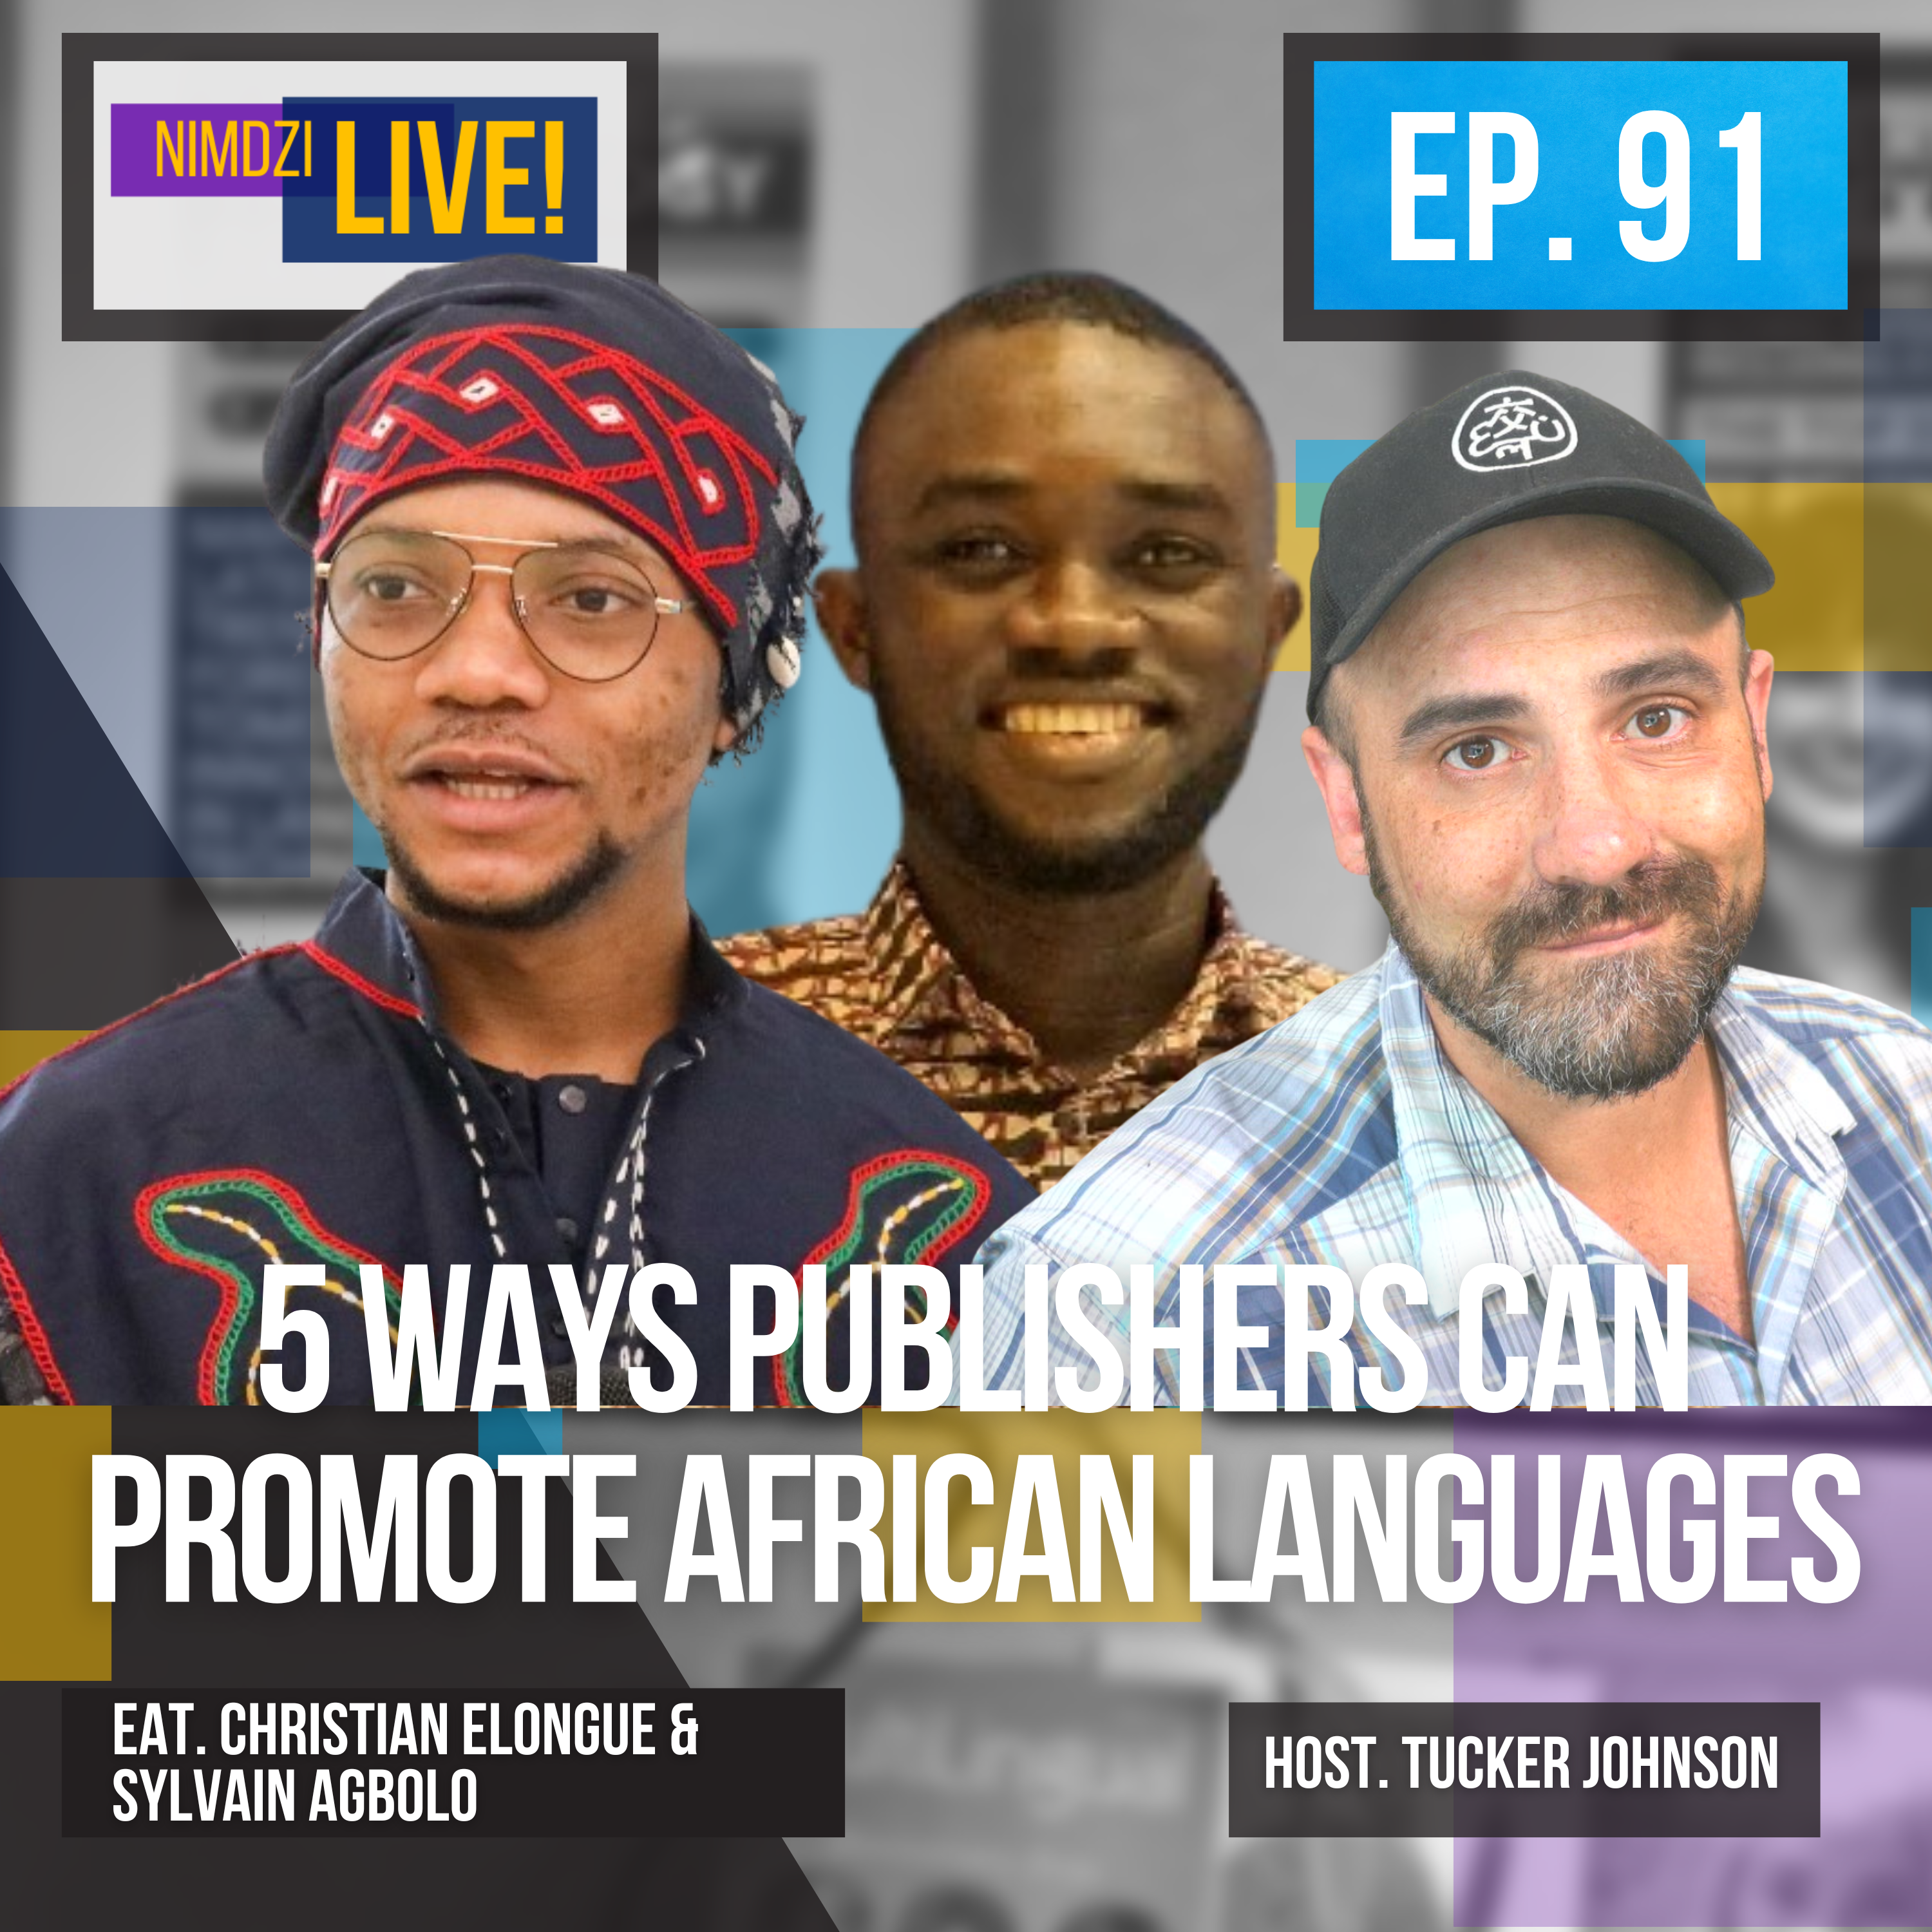 5 Ways Publishers can promote African Languages feat. Christian Elongué